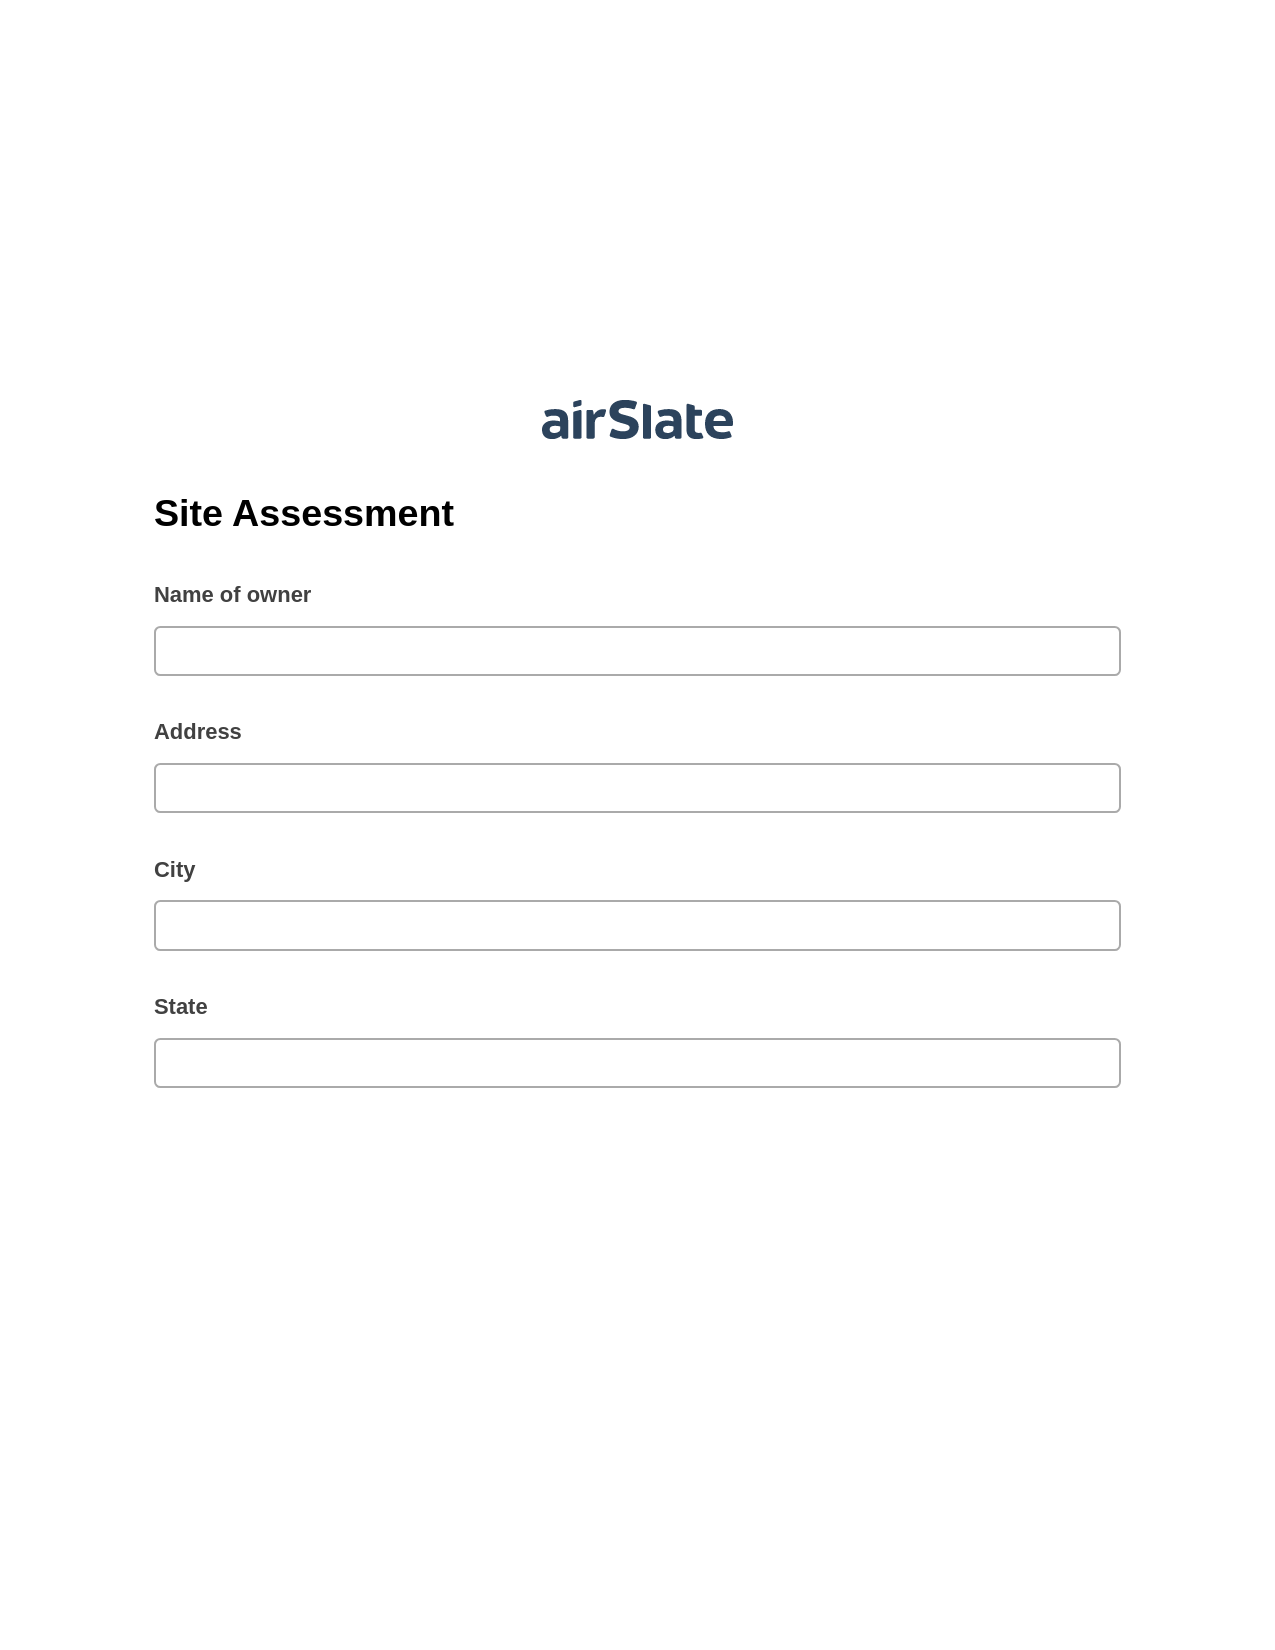 Site Assessment Pre-fill from CSV File Dropdown Options Bot, Webhook Bot, Export to Salesforce Bot